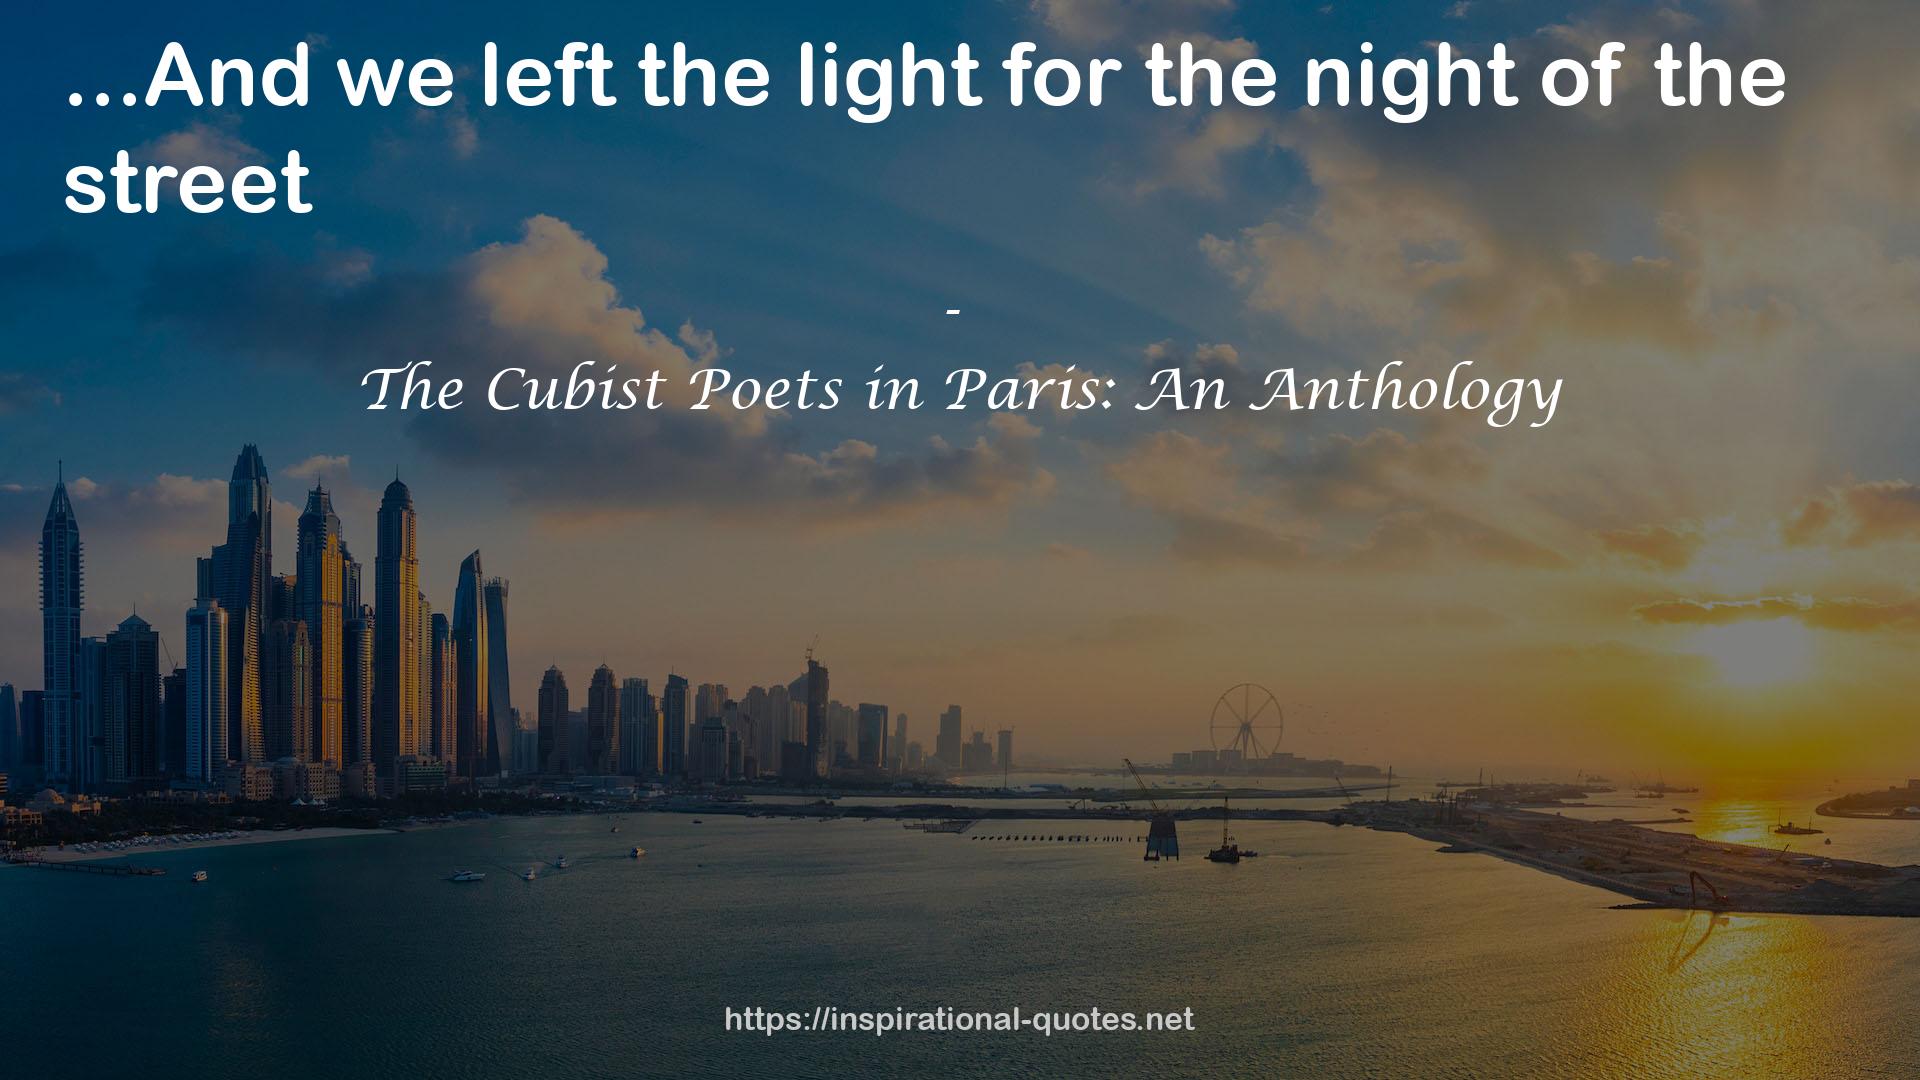 The Cubist Poets in Paris: An Anthology QUOTES